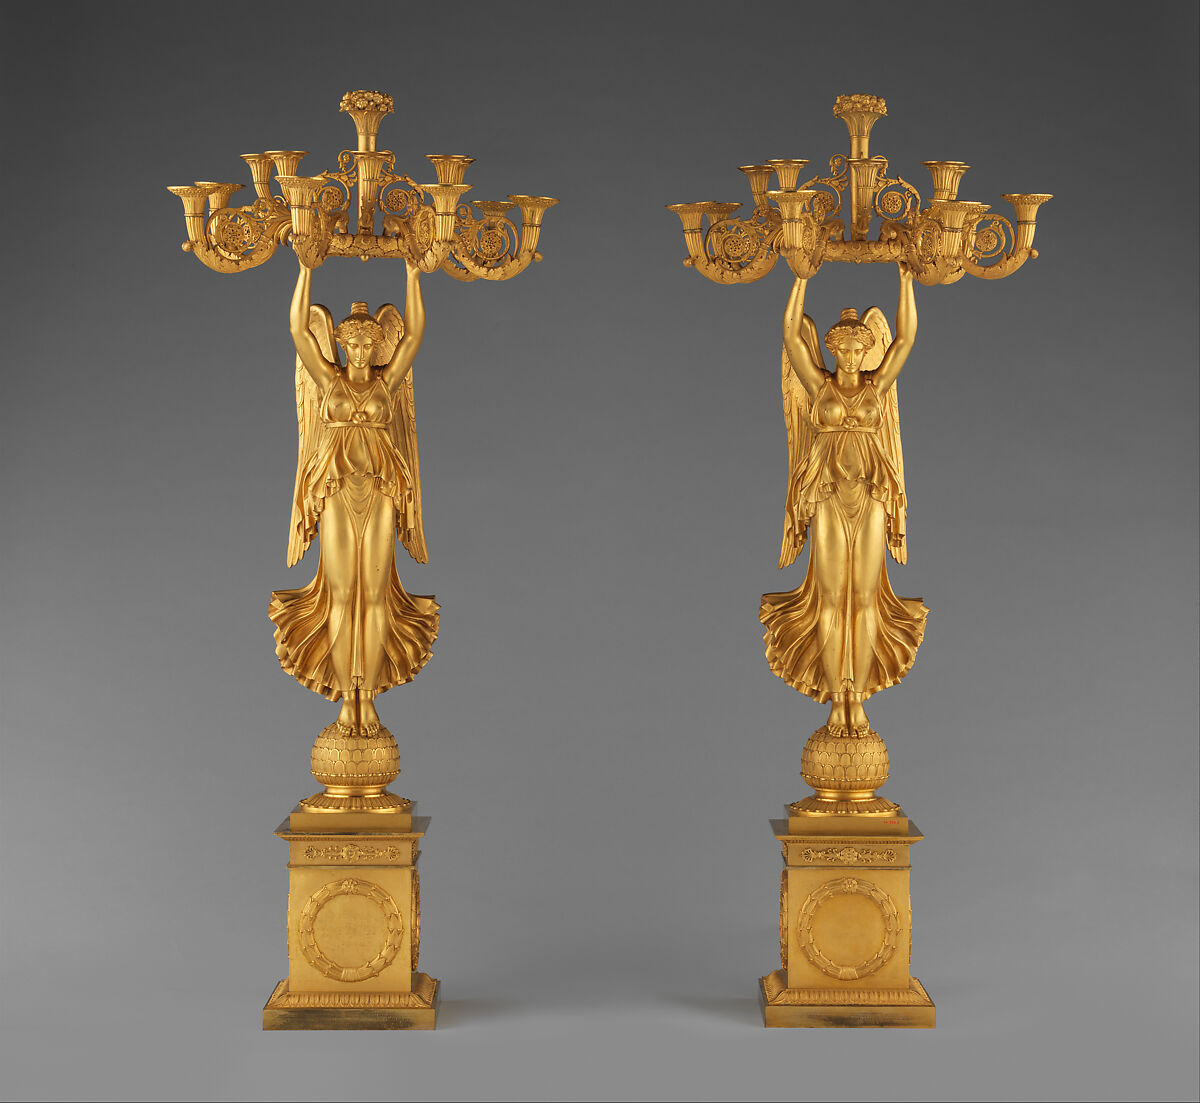 Pair of candelabra with Winged Victories